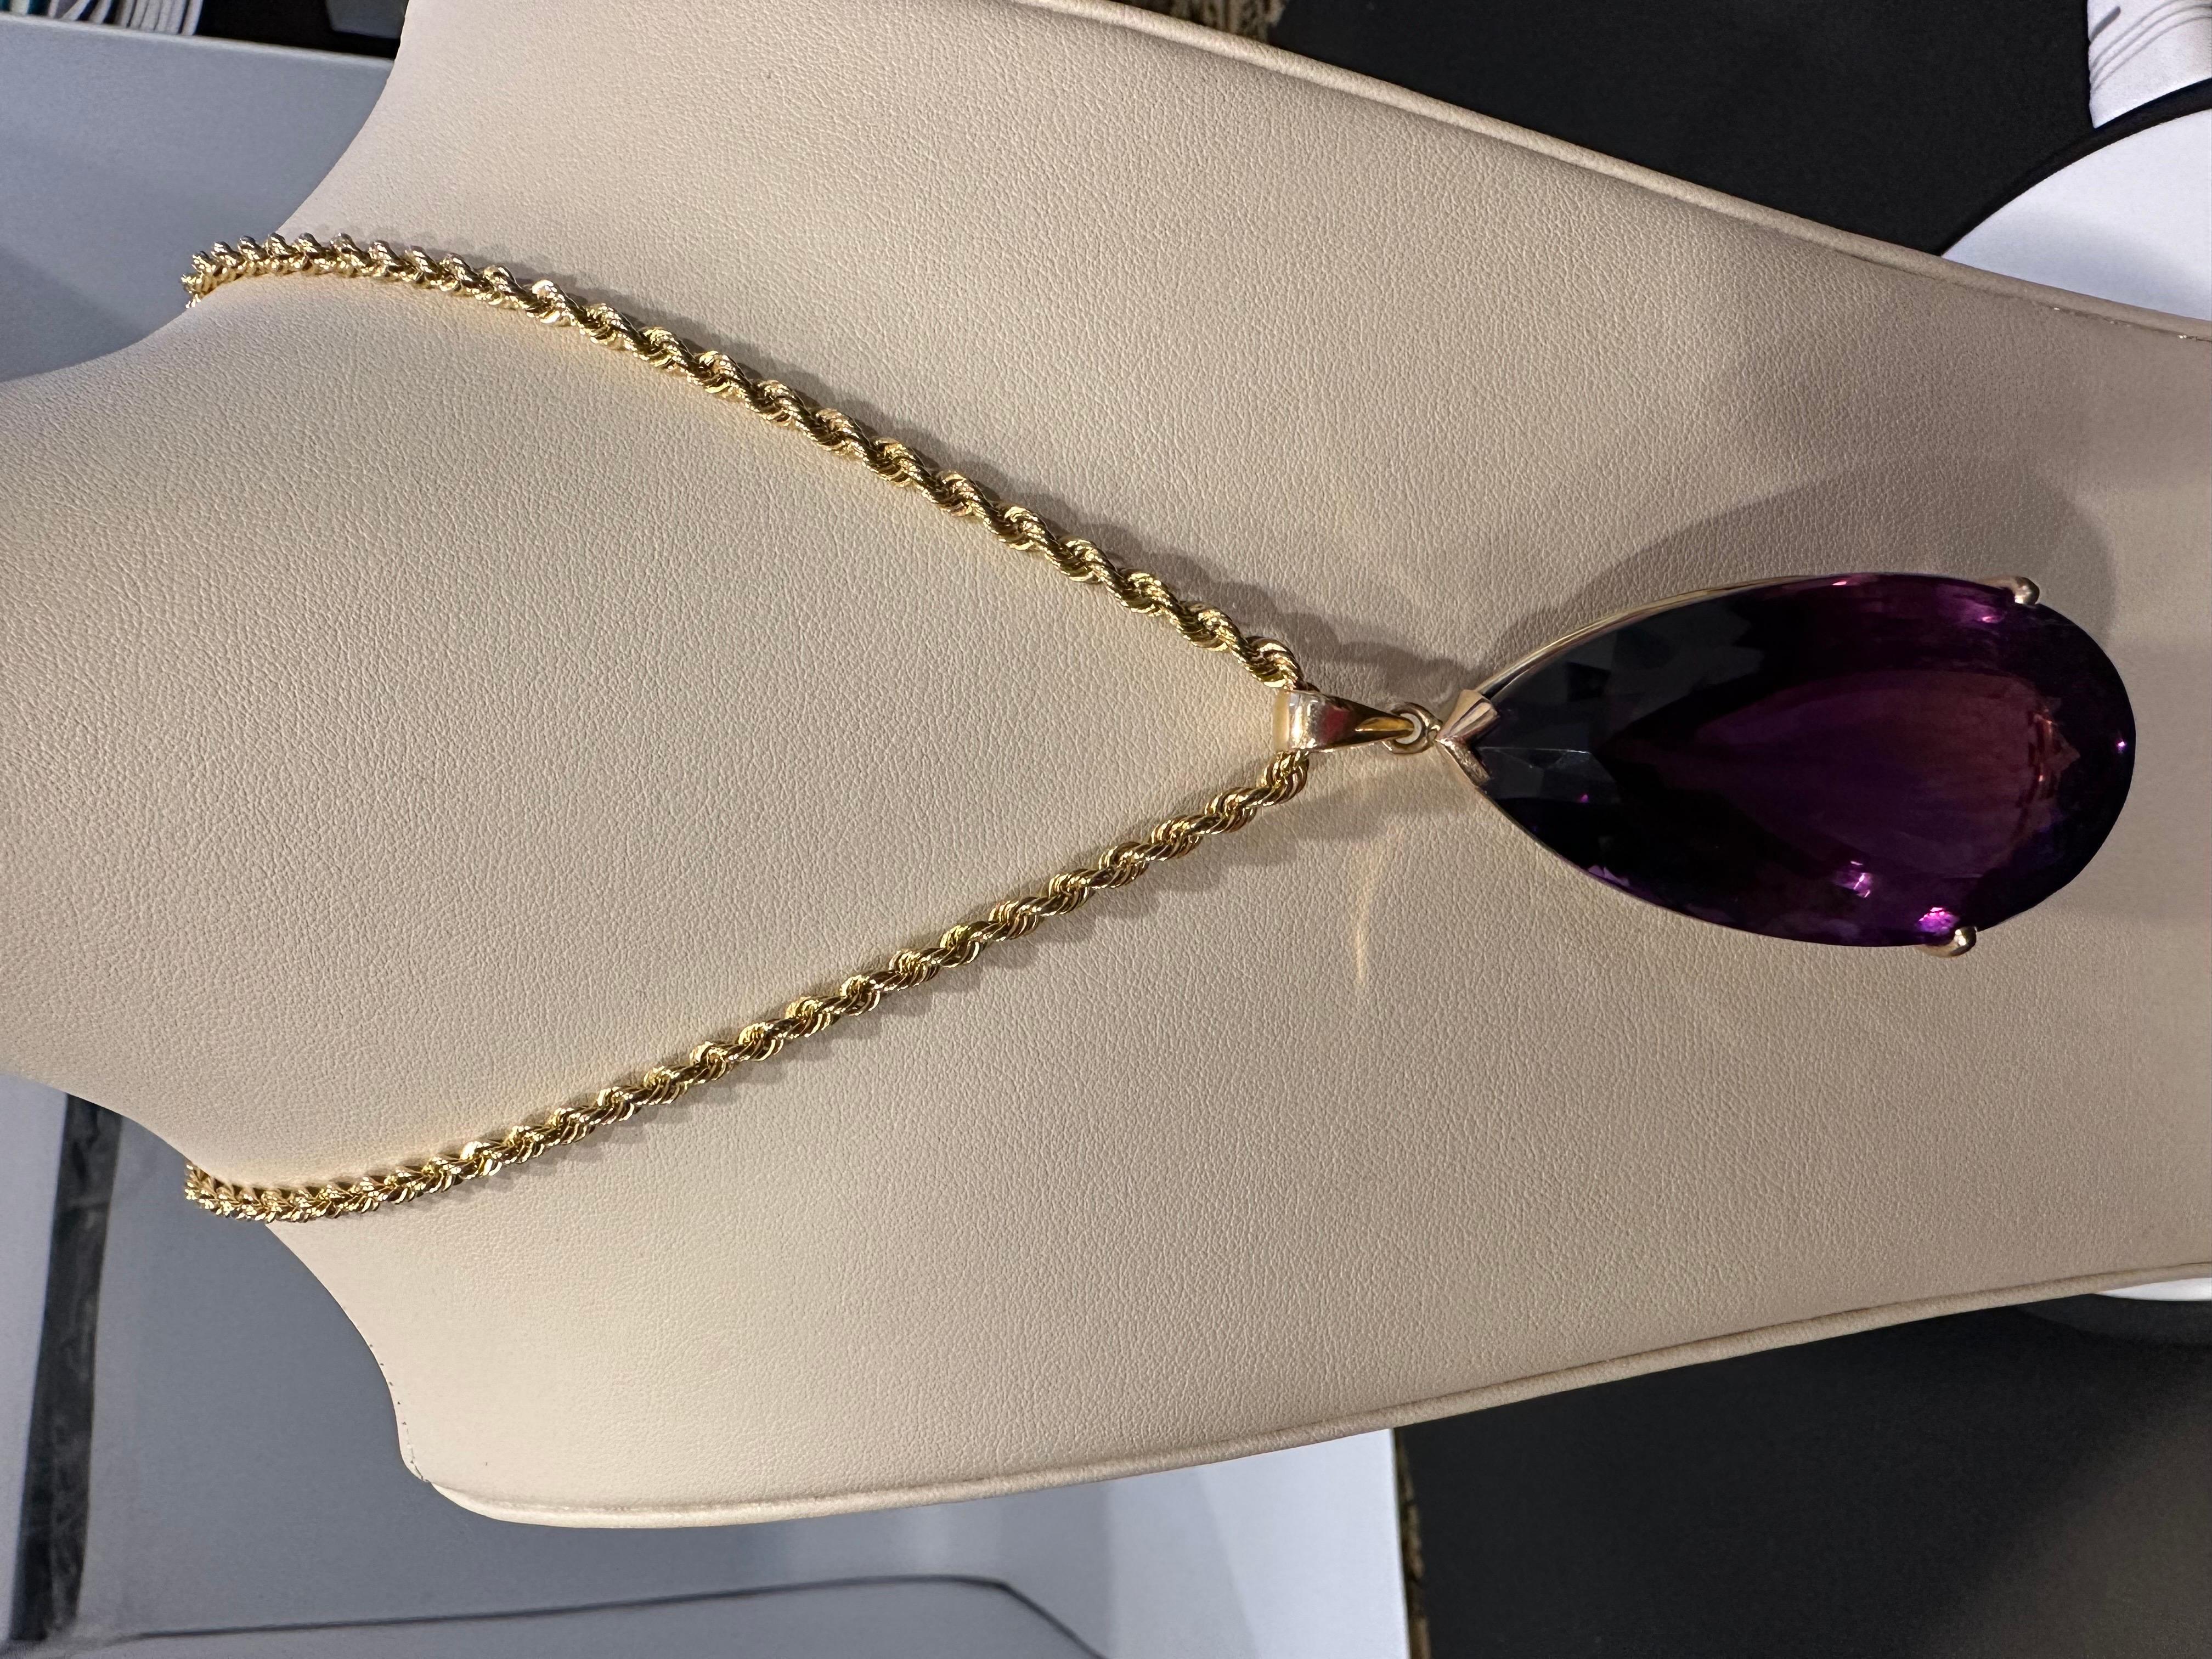 This spectacular Pendant Necklace consists of a single large Perfect Pear shape Amethyst, weighing 233.36 Carat. The Amethyst has a Gold Frame around it, and it has a large bail. However, the chain is not included, and the pendant does not come with